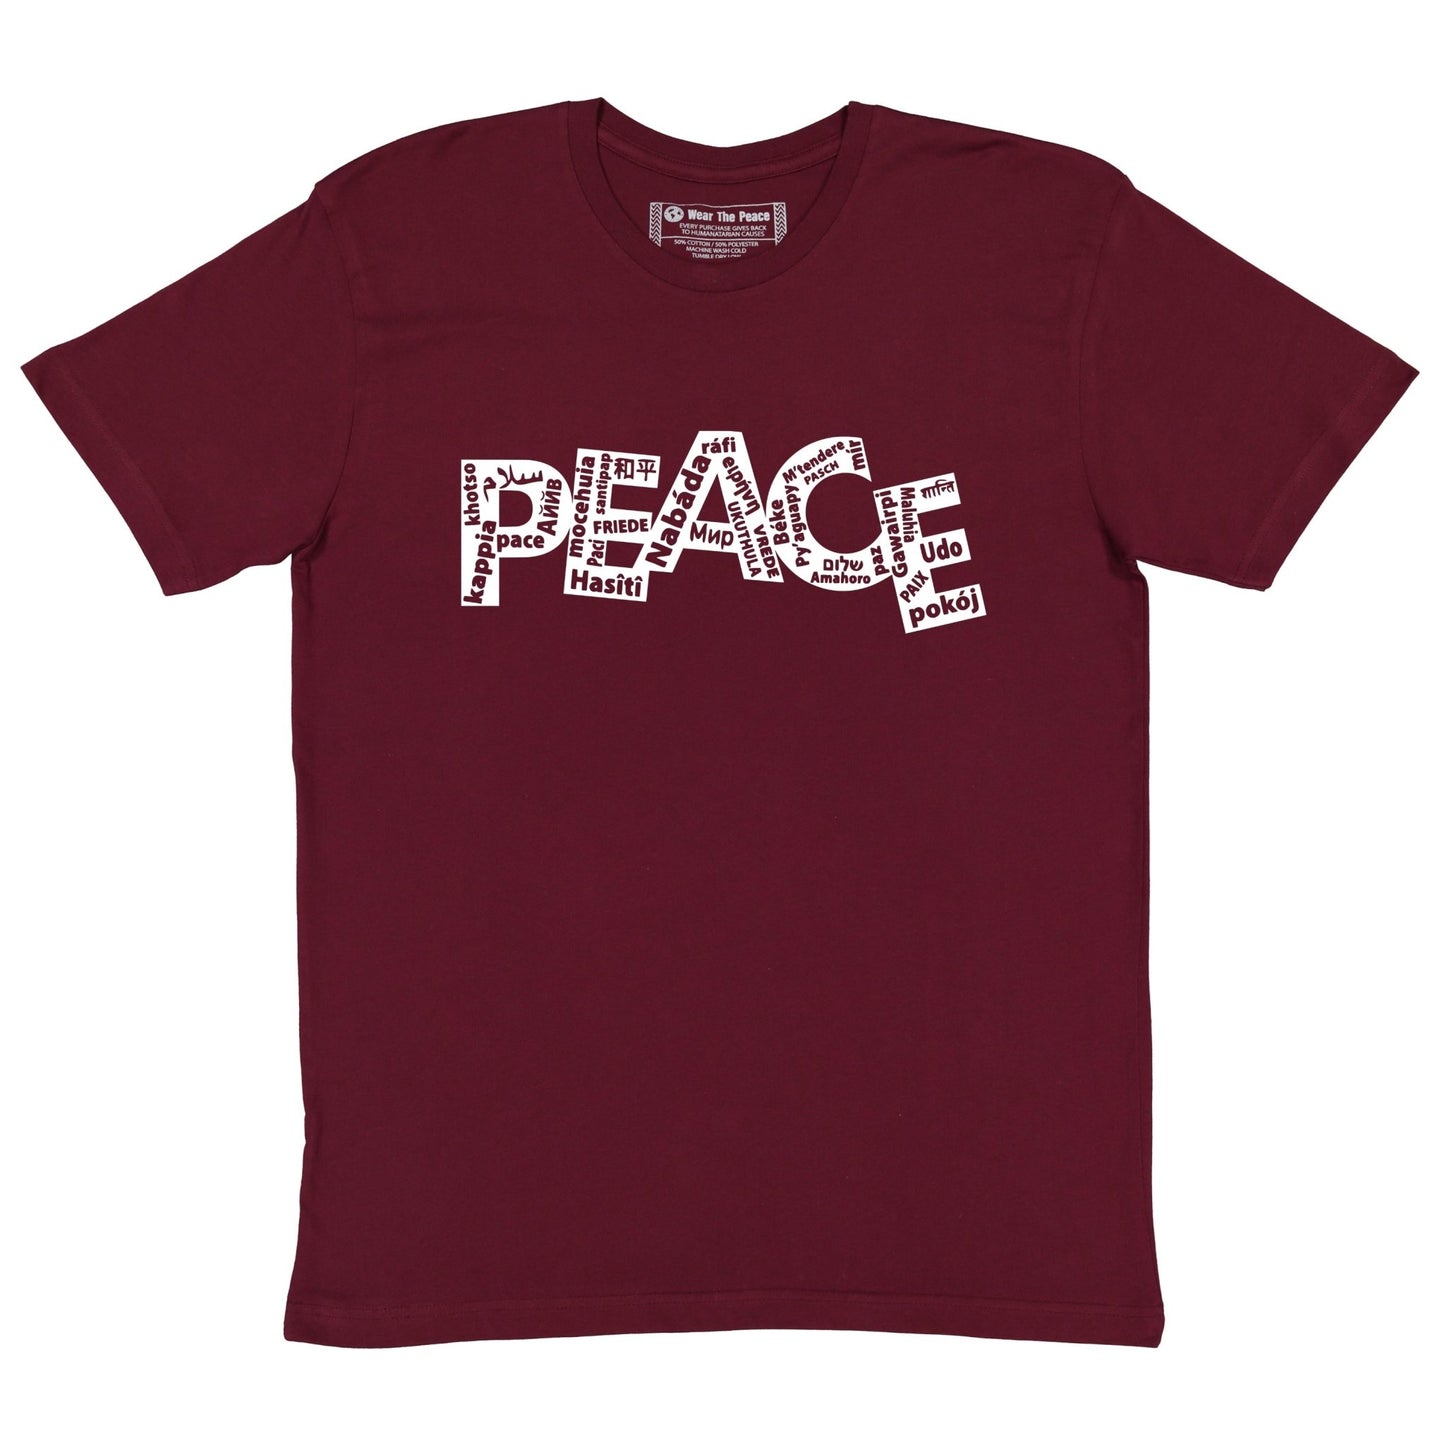 Load image into Gallery viewer, World Language Peace Tee Wear The Peace Short Sleeves Maroon S
